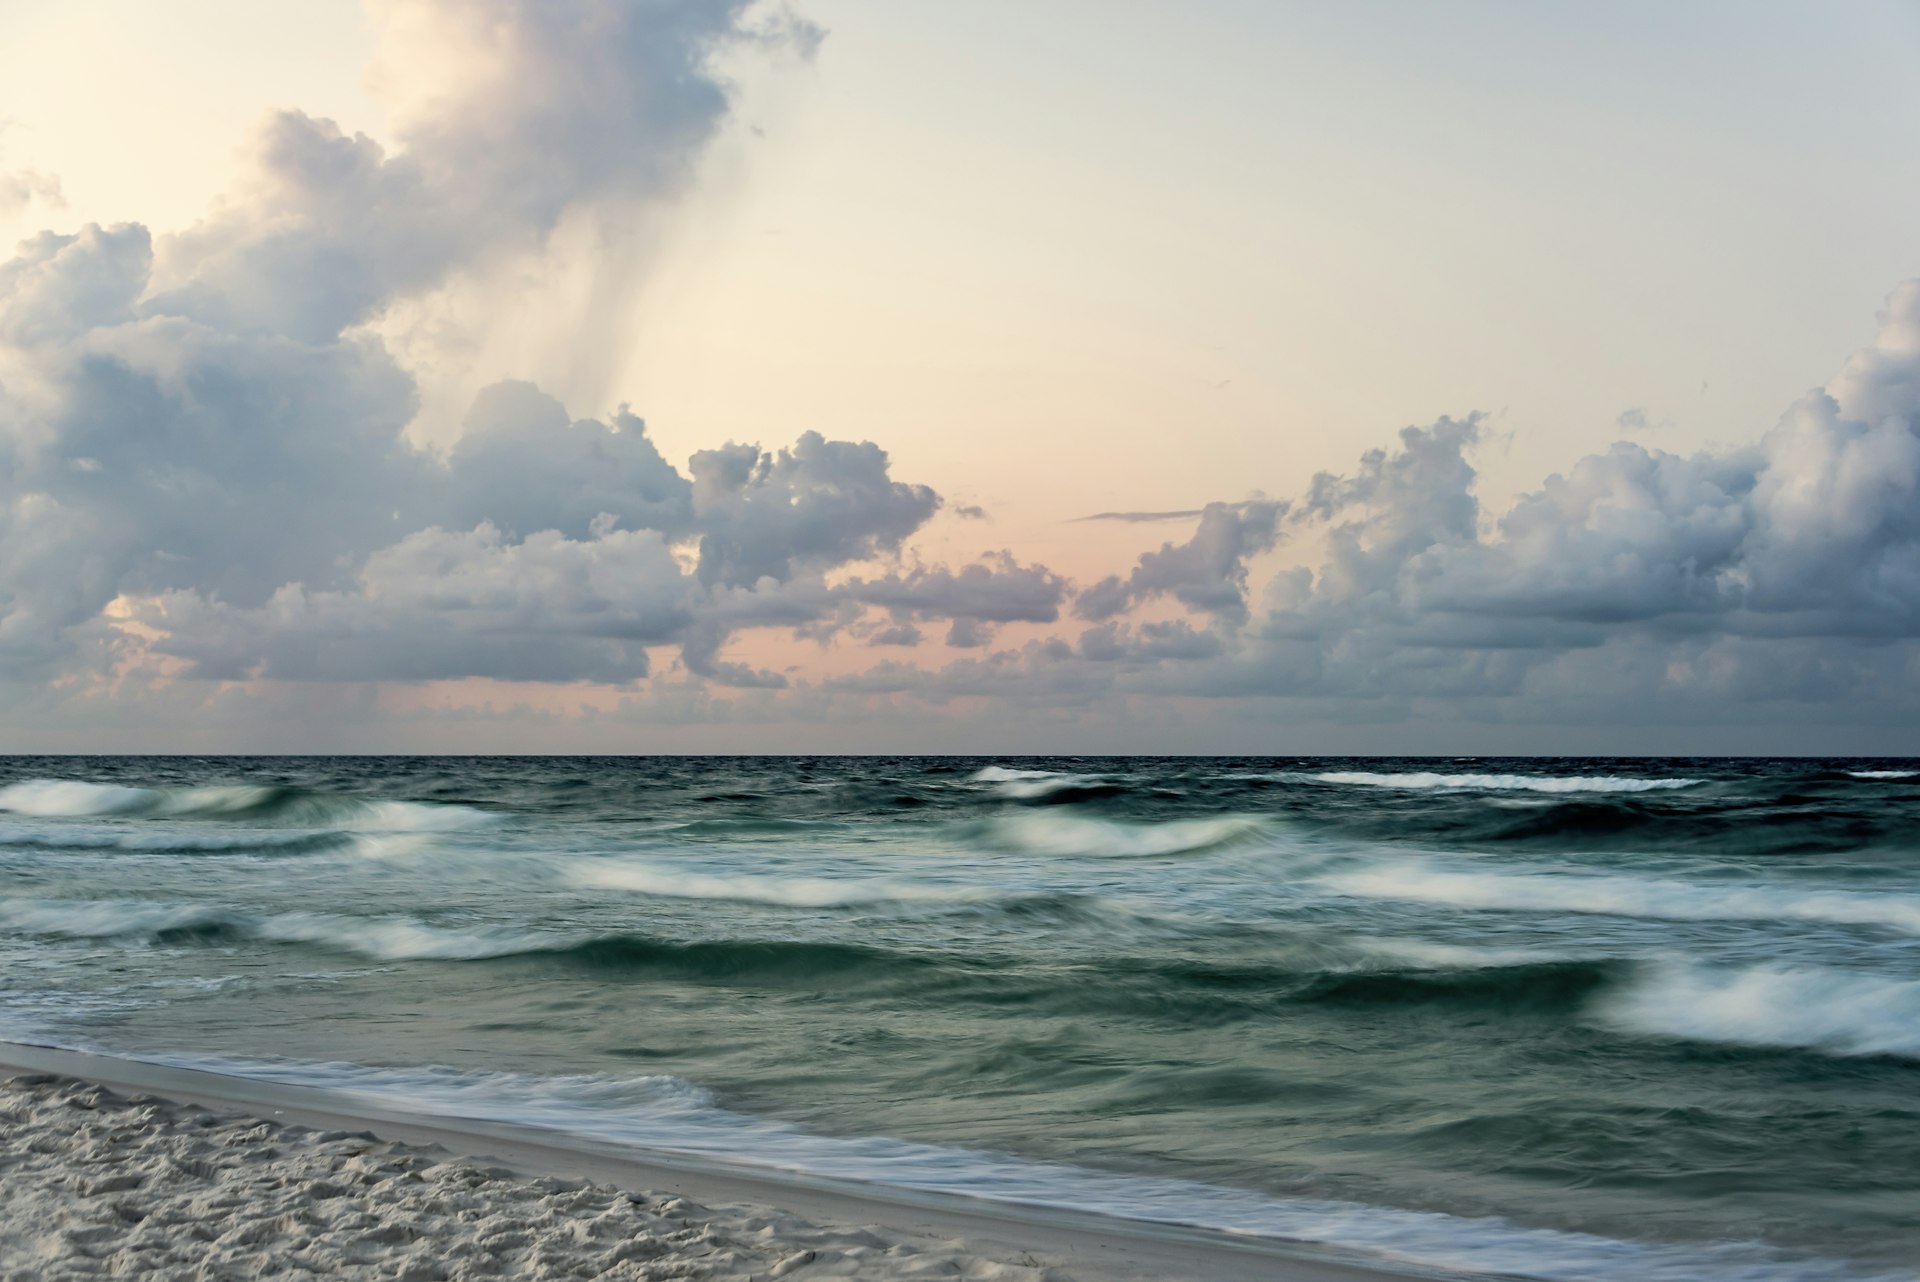 No doubt the beaches are beautiful, but the Emerald Coast has more than surf and sand to offer © kimberford / Getty Images